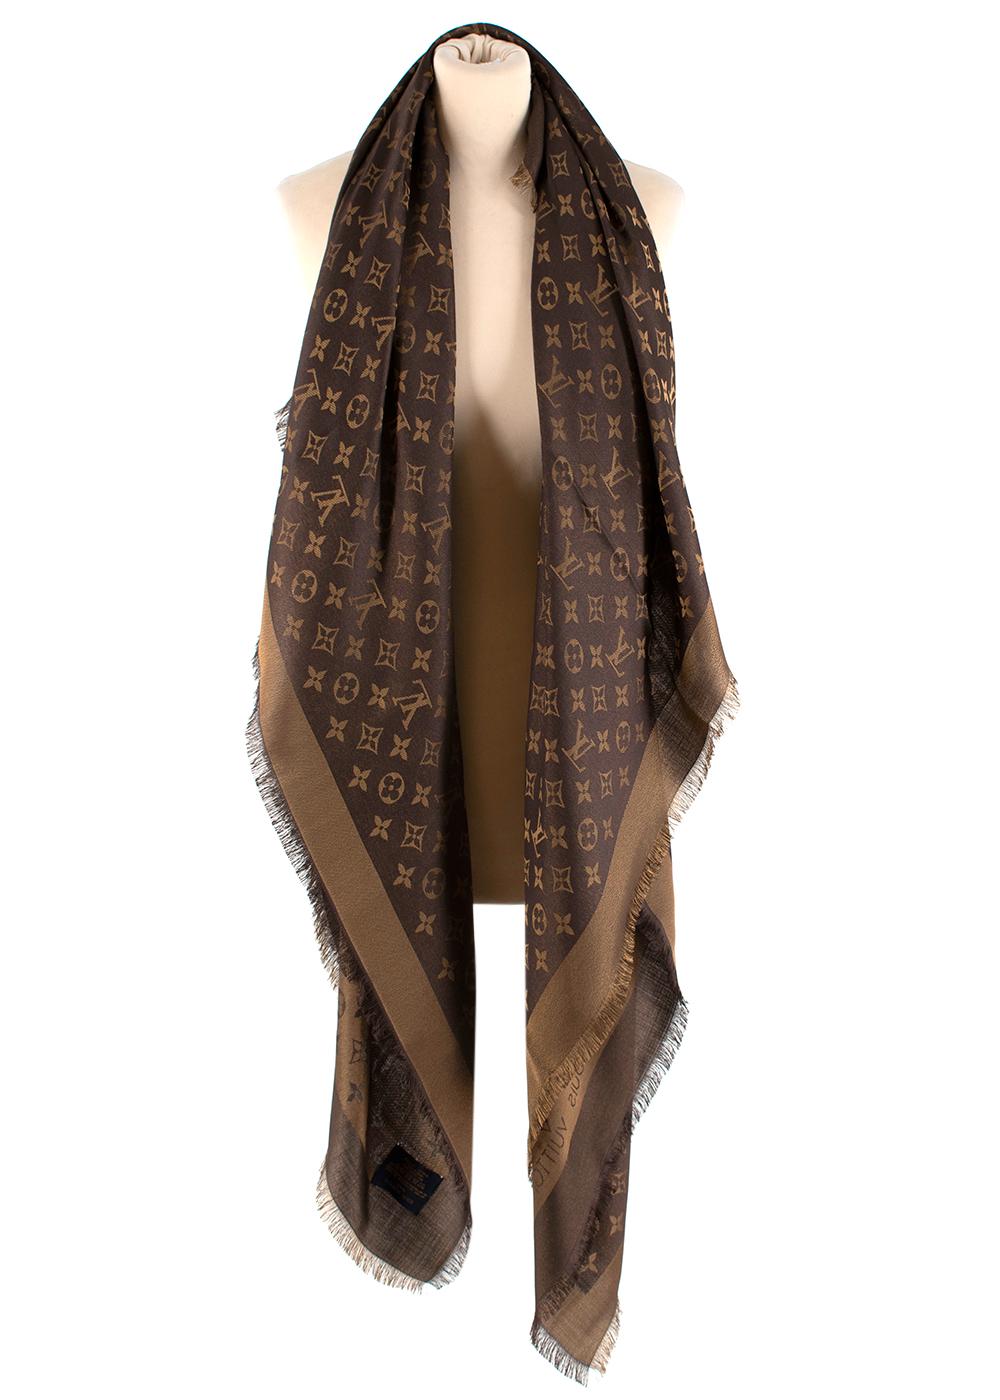 Louis Vuitton Brown & Gold Monogram Shine Shawl

This sophisticated shawl, woven with a tone-on-tone Monogram pattern, is given a subtle shimmer by the use of a soft shine yarn.

-Iconic monogram pattern
-Gorgeous, classic brown hue with a gold